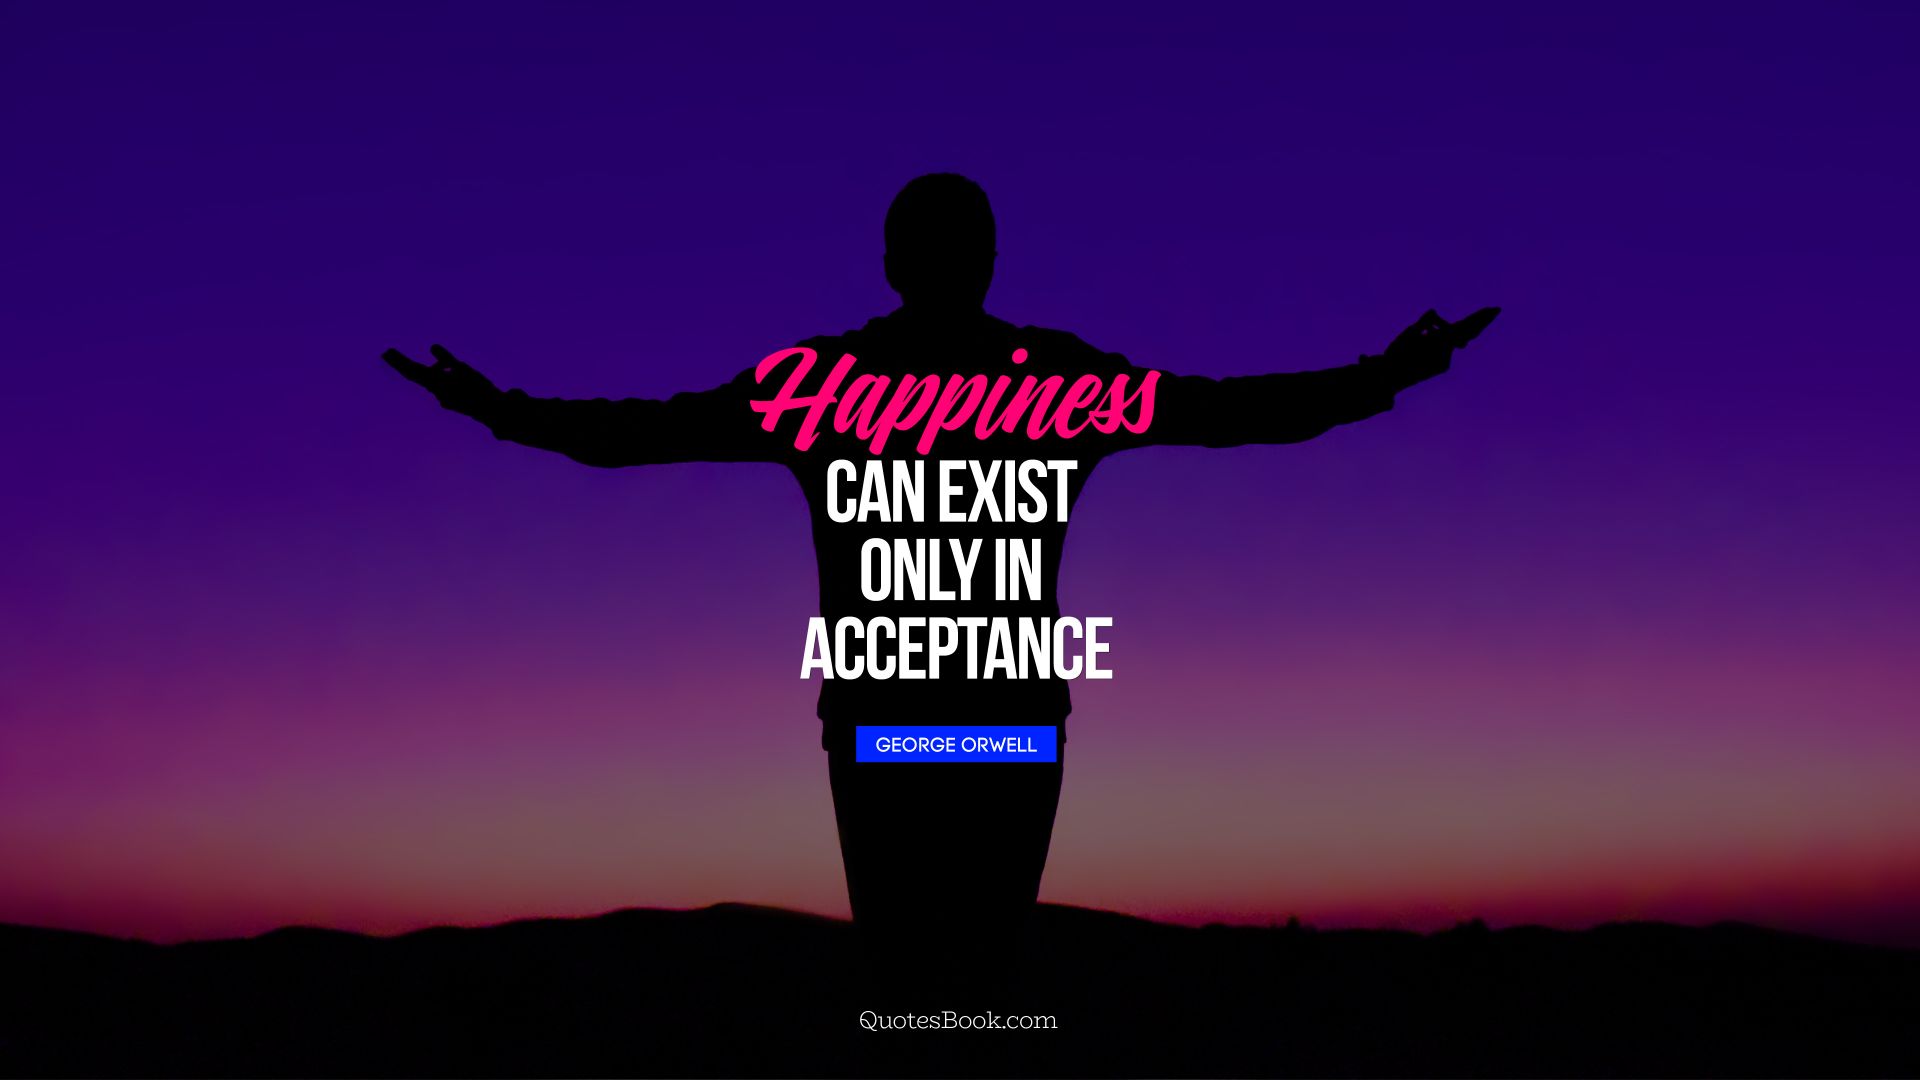 Happiness can exist only in acceptance. - Quote by George Orwell